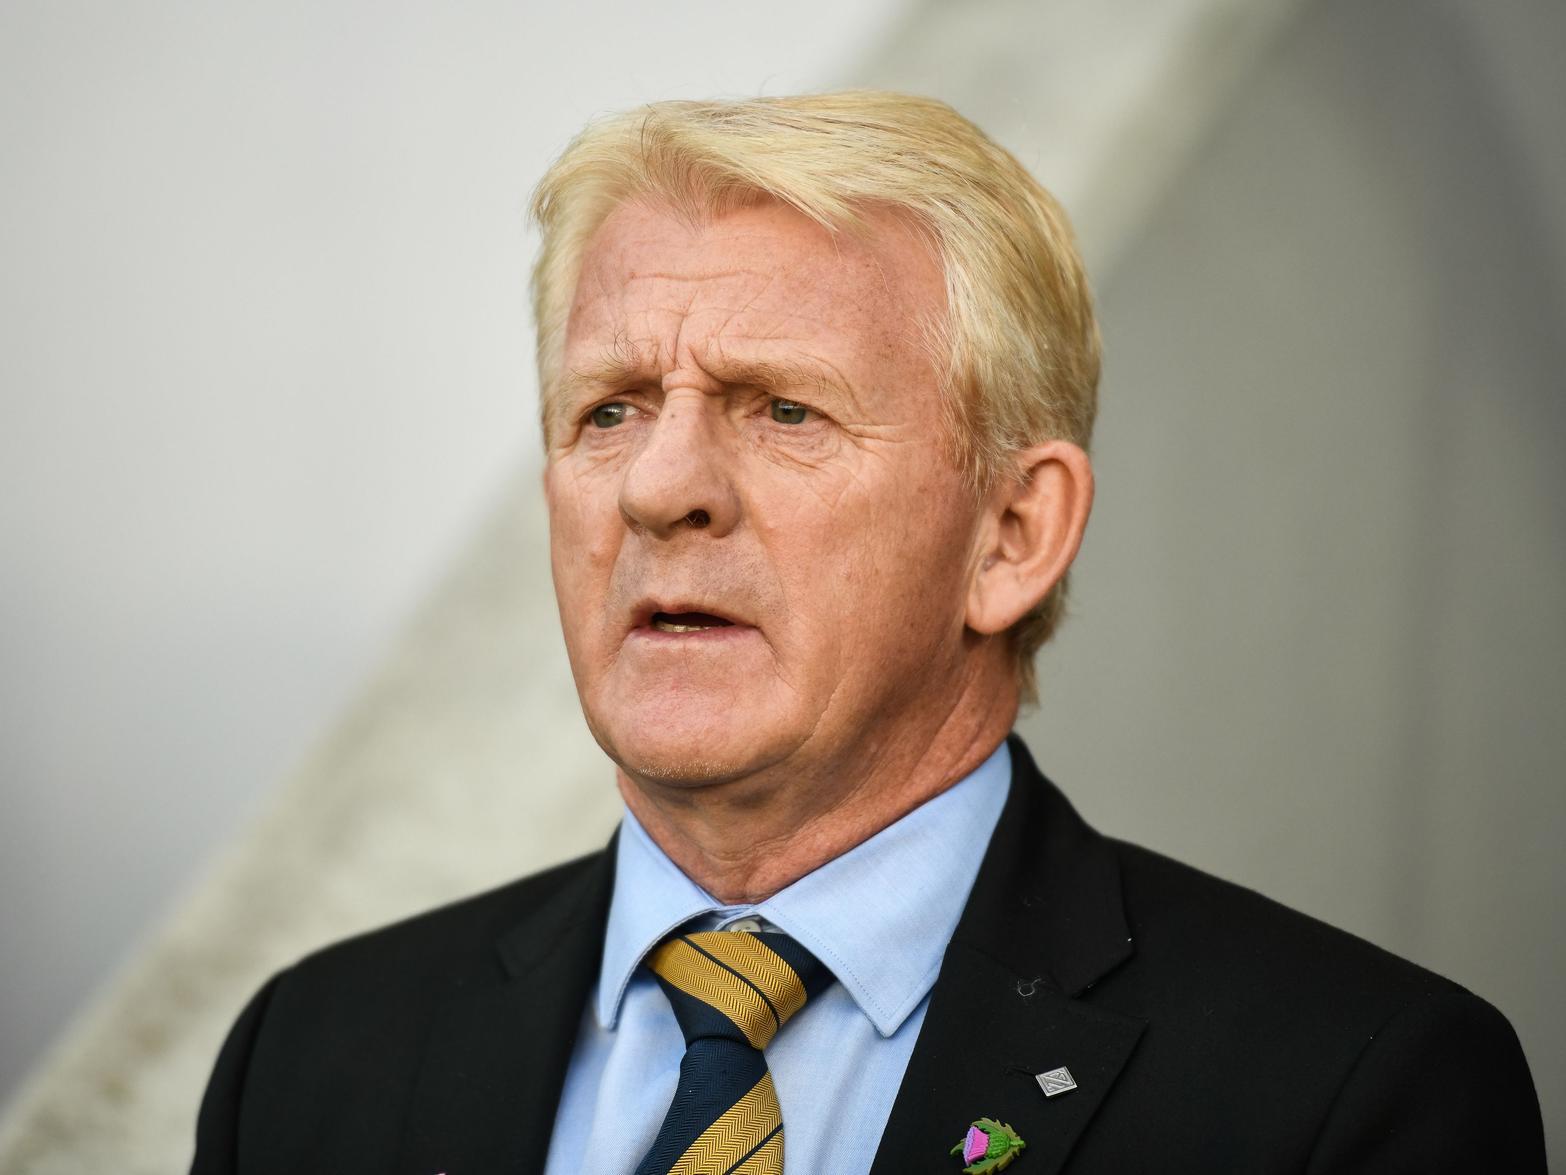 Former Scotland boss was in the running last time (according to the bookies) but has taken DoF role at Dundee. Would a spell managing his boyhood club tempt him back to management?